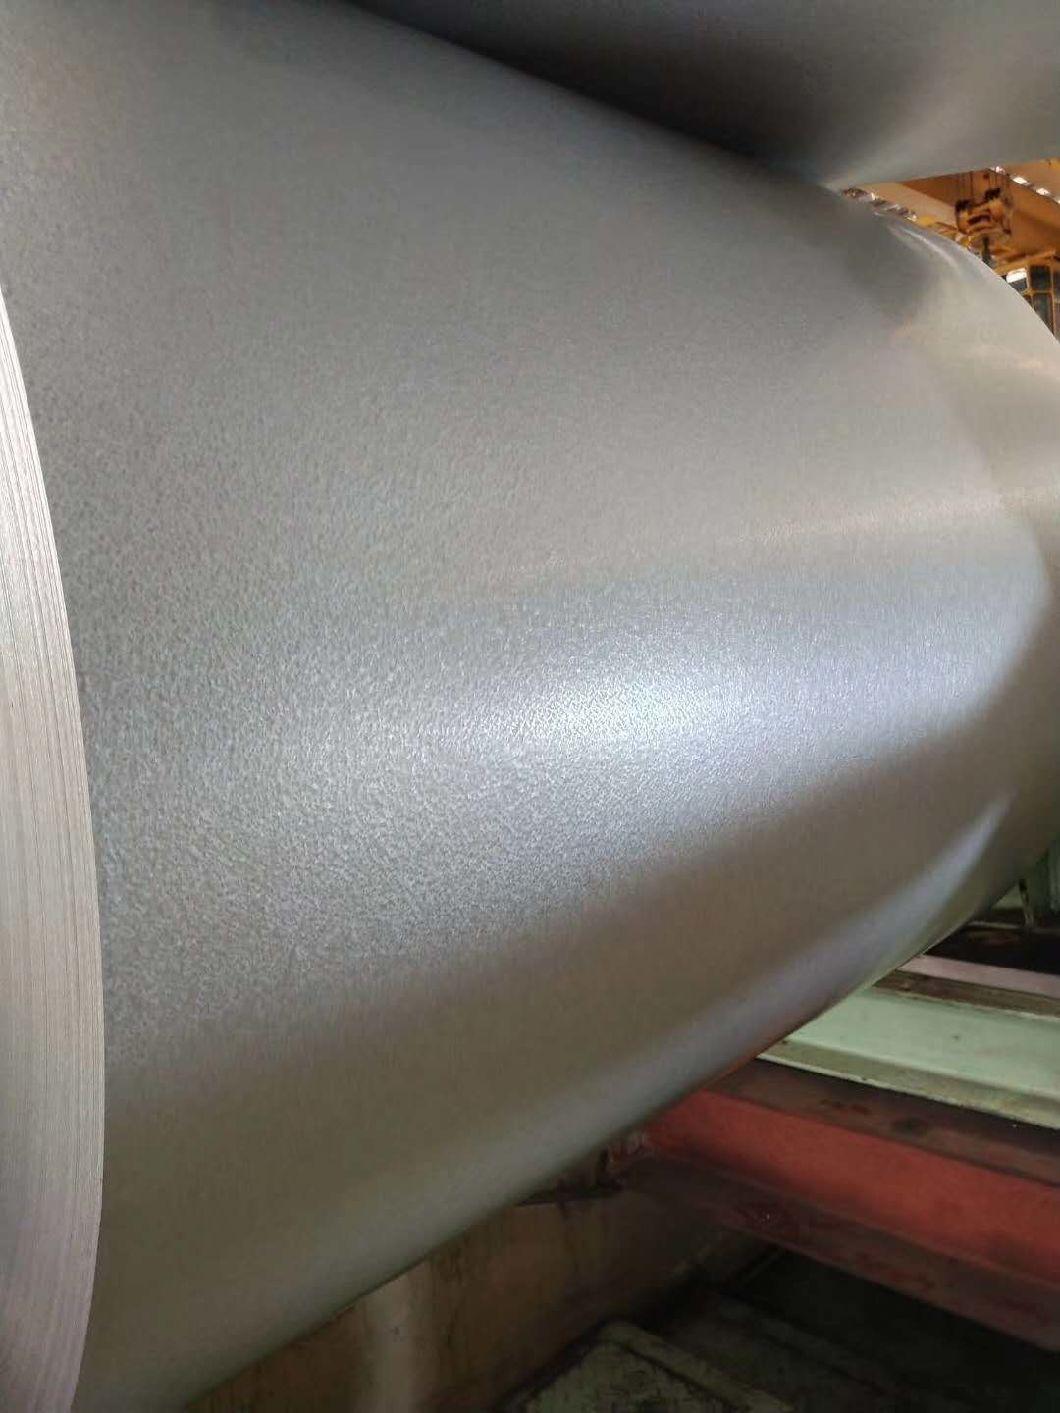 DC01 1.0330 En 10152: 2009 Electrolytically Zinc Coated Cold Rolled Steel Coil